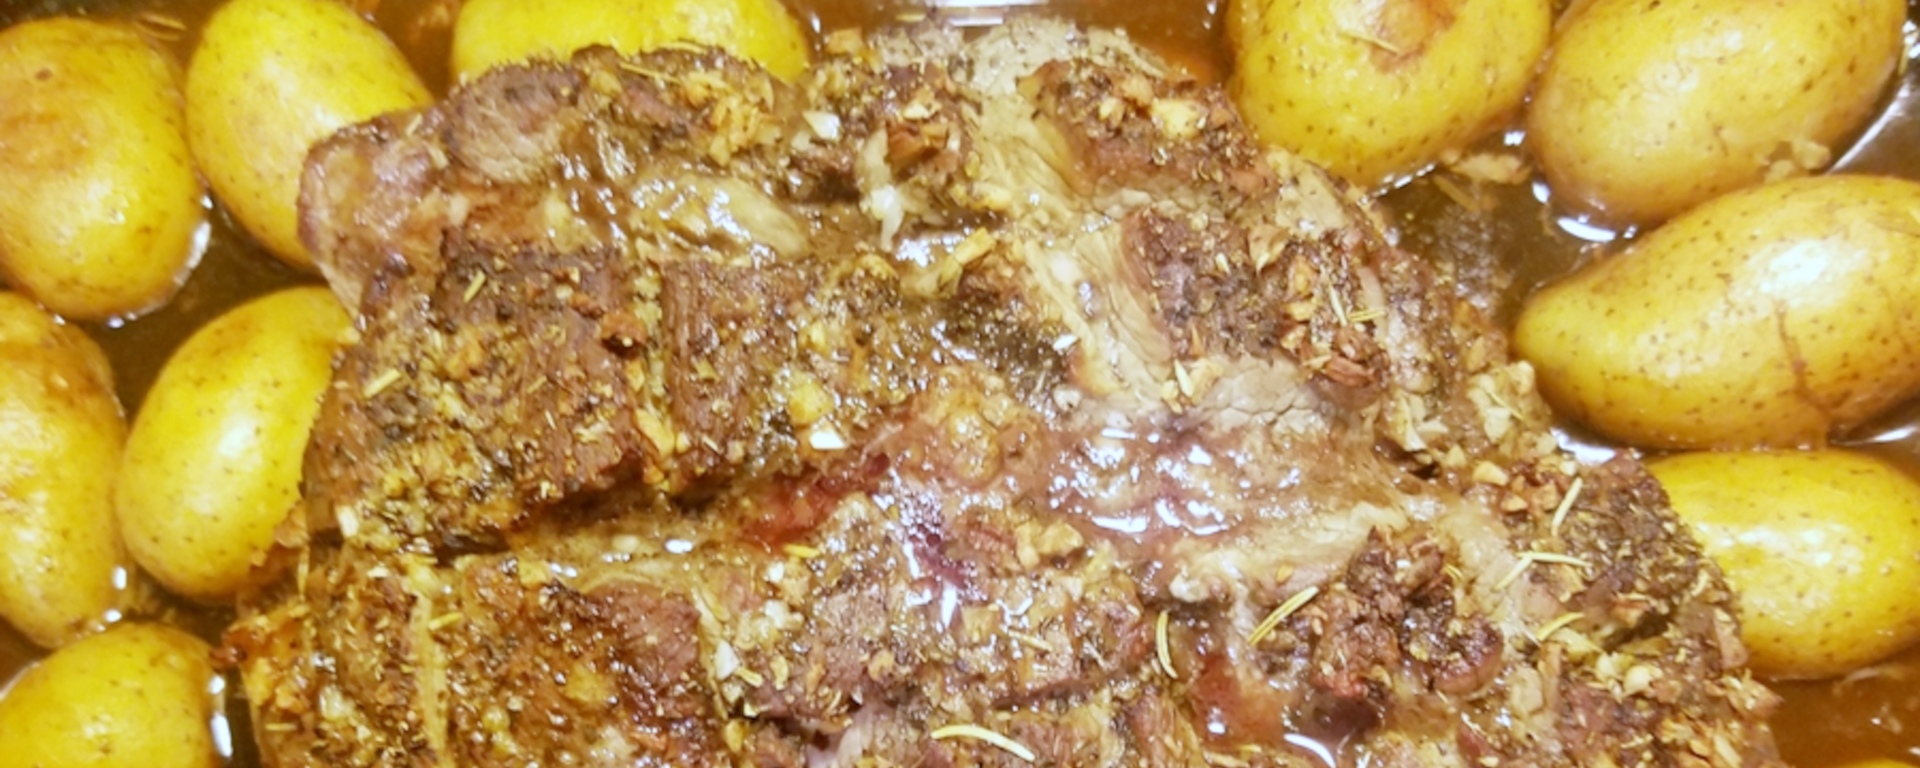 LuvMyRecipe.com - Perfect Leg of Lamb with Roasted Golden Potatoes Featured